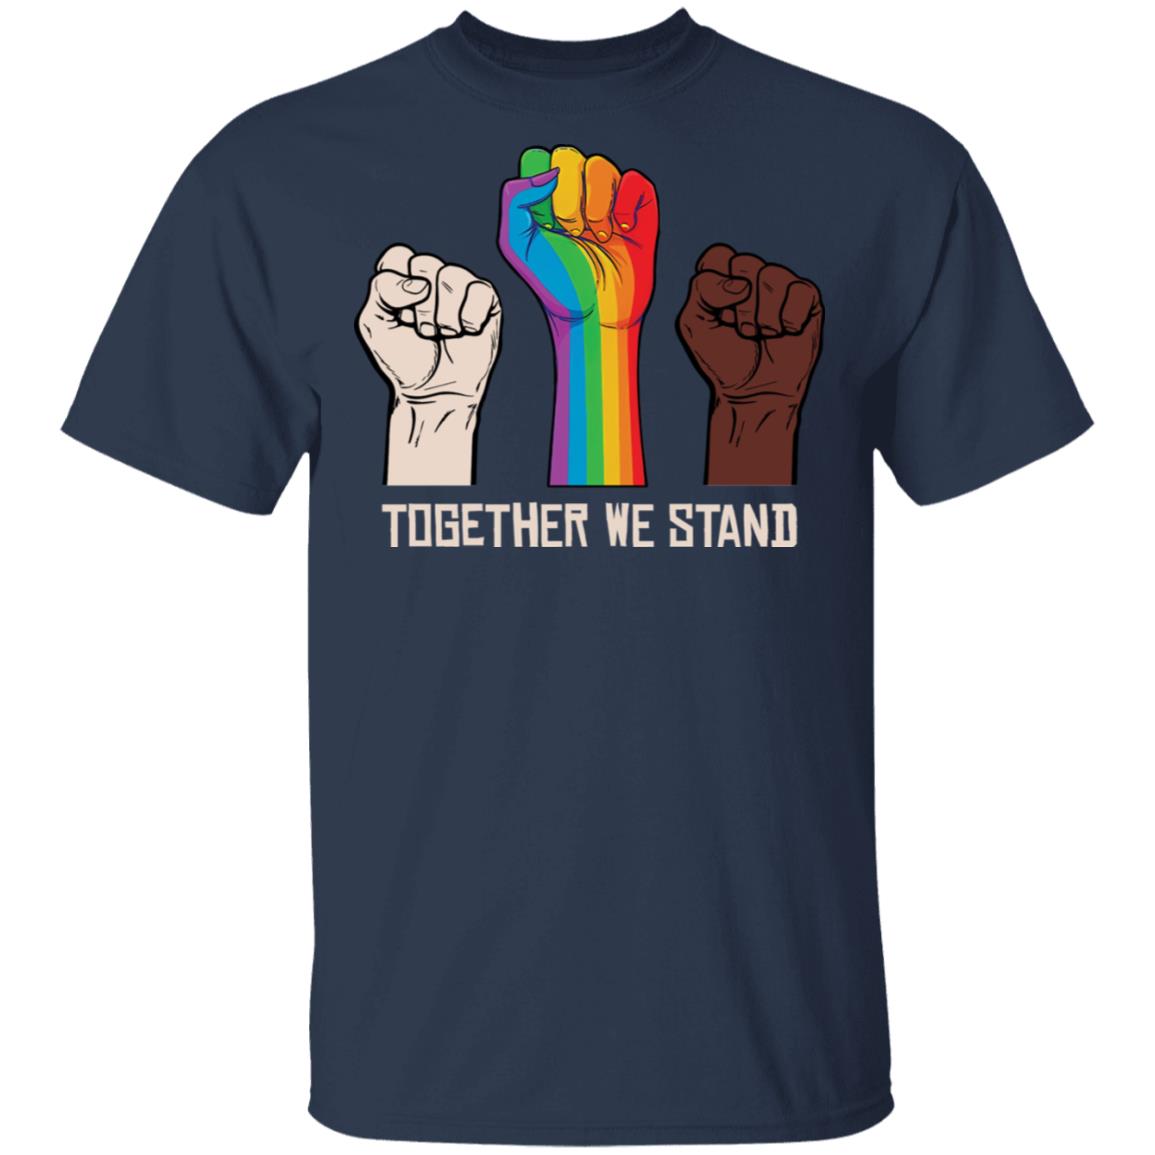 Together we stand shirt - Rockatee